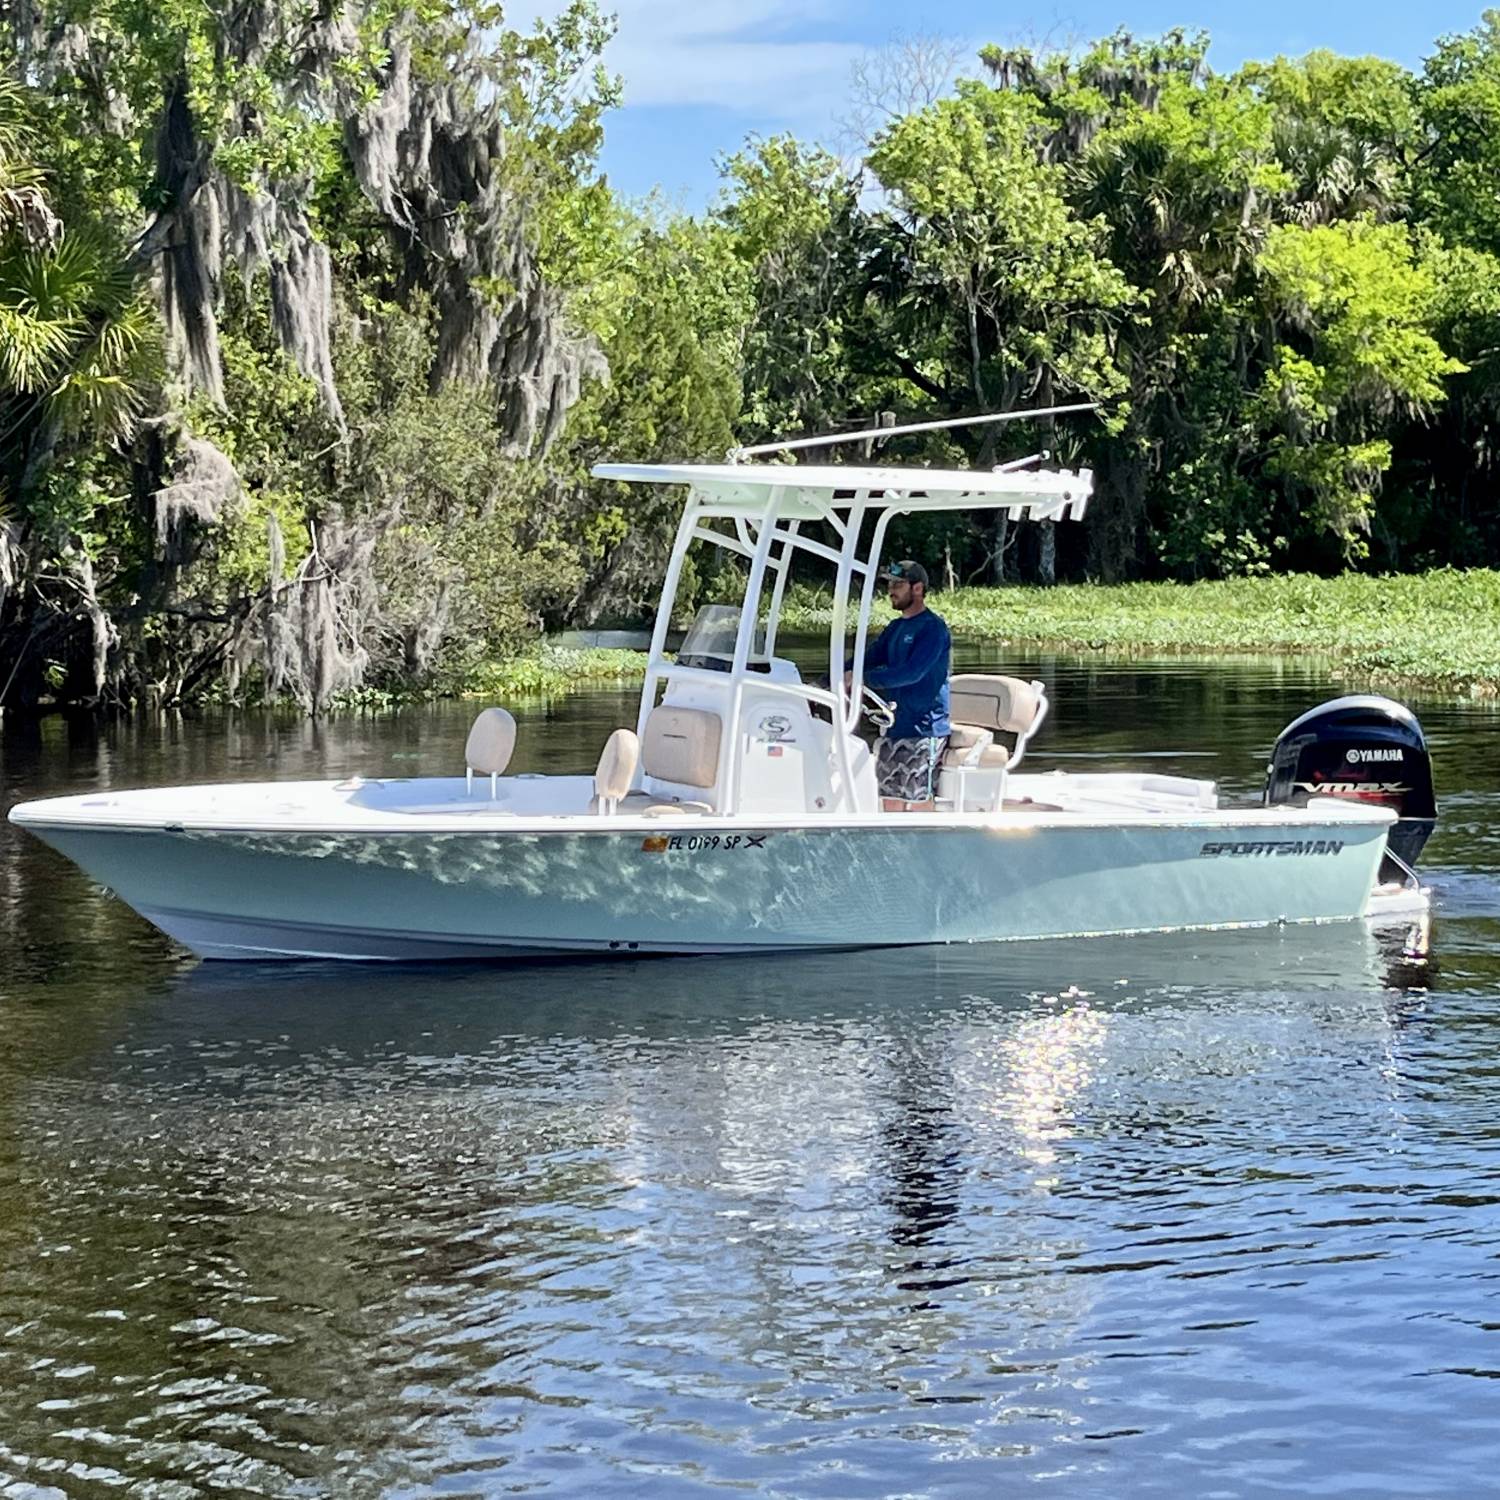 Title: Easy like a Sunday Morning - On board their Sportsman Masters 227 Bay Boat - Location: Lake George in Florida. Participating in the Photo Contest #SportsmanJune